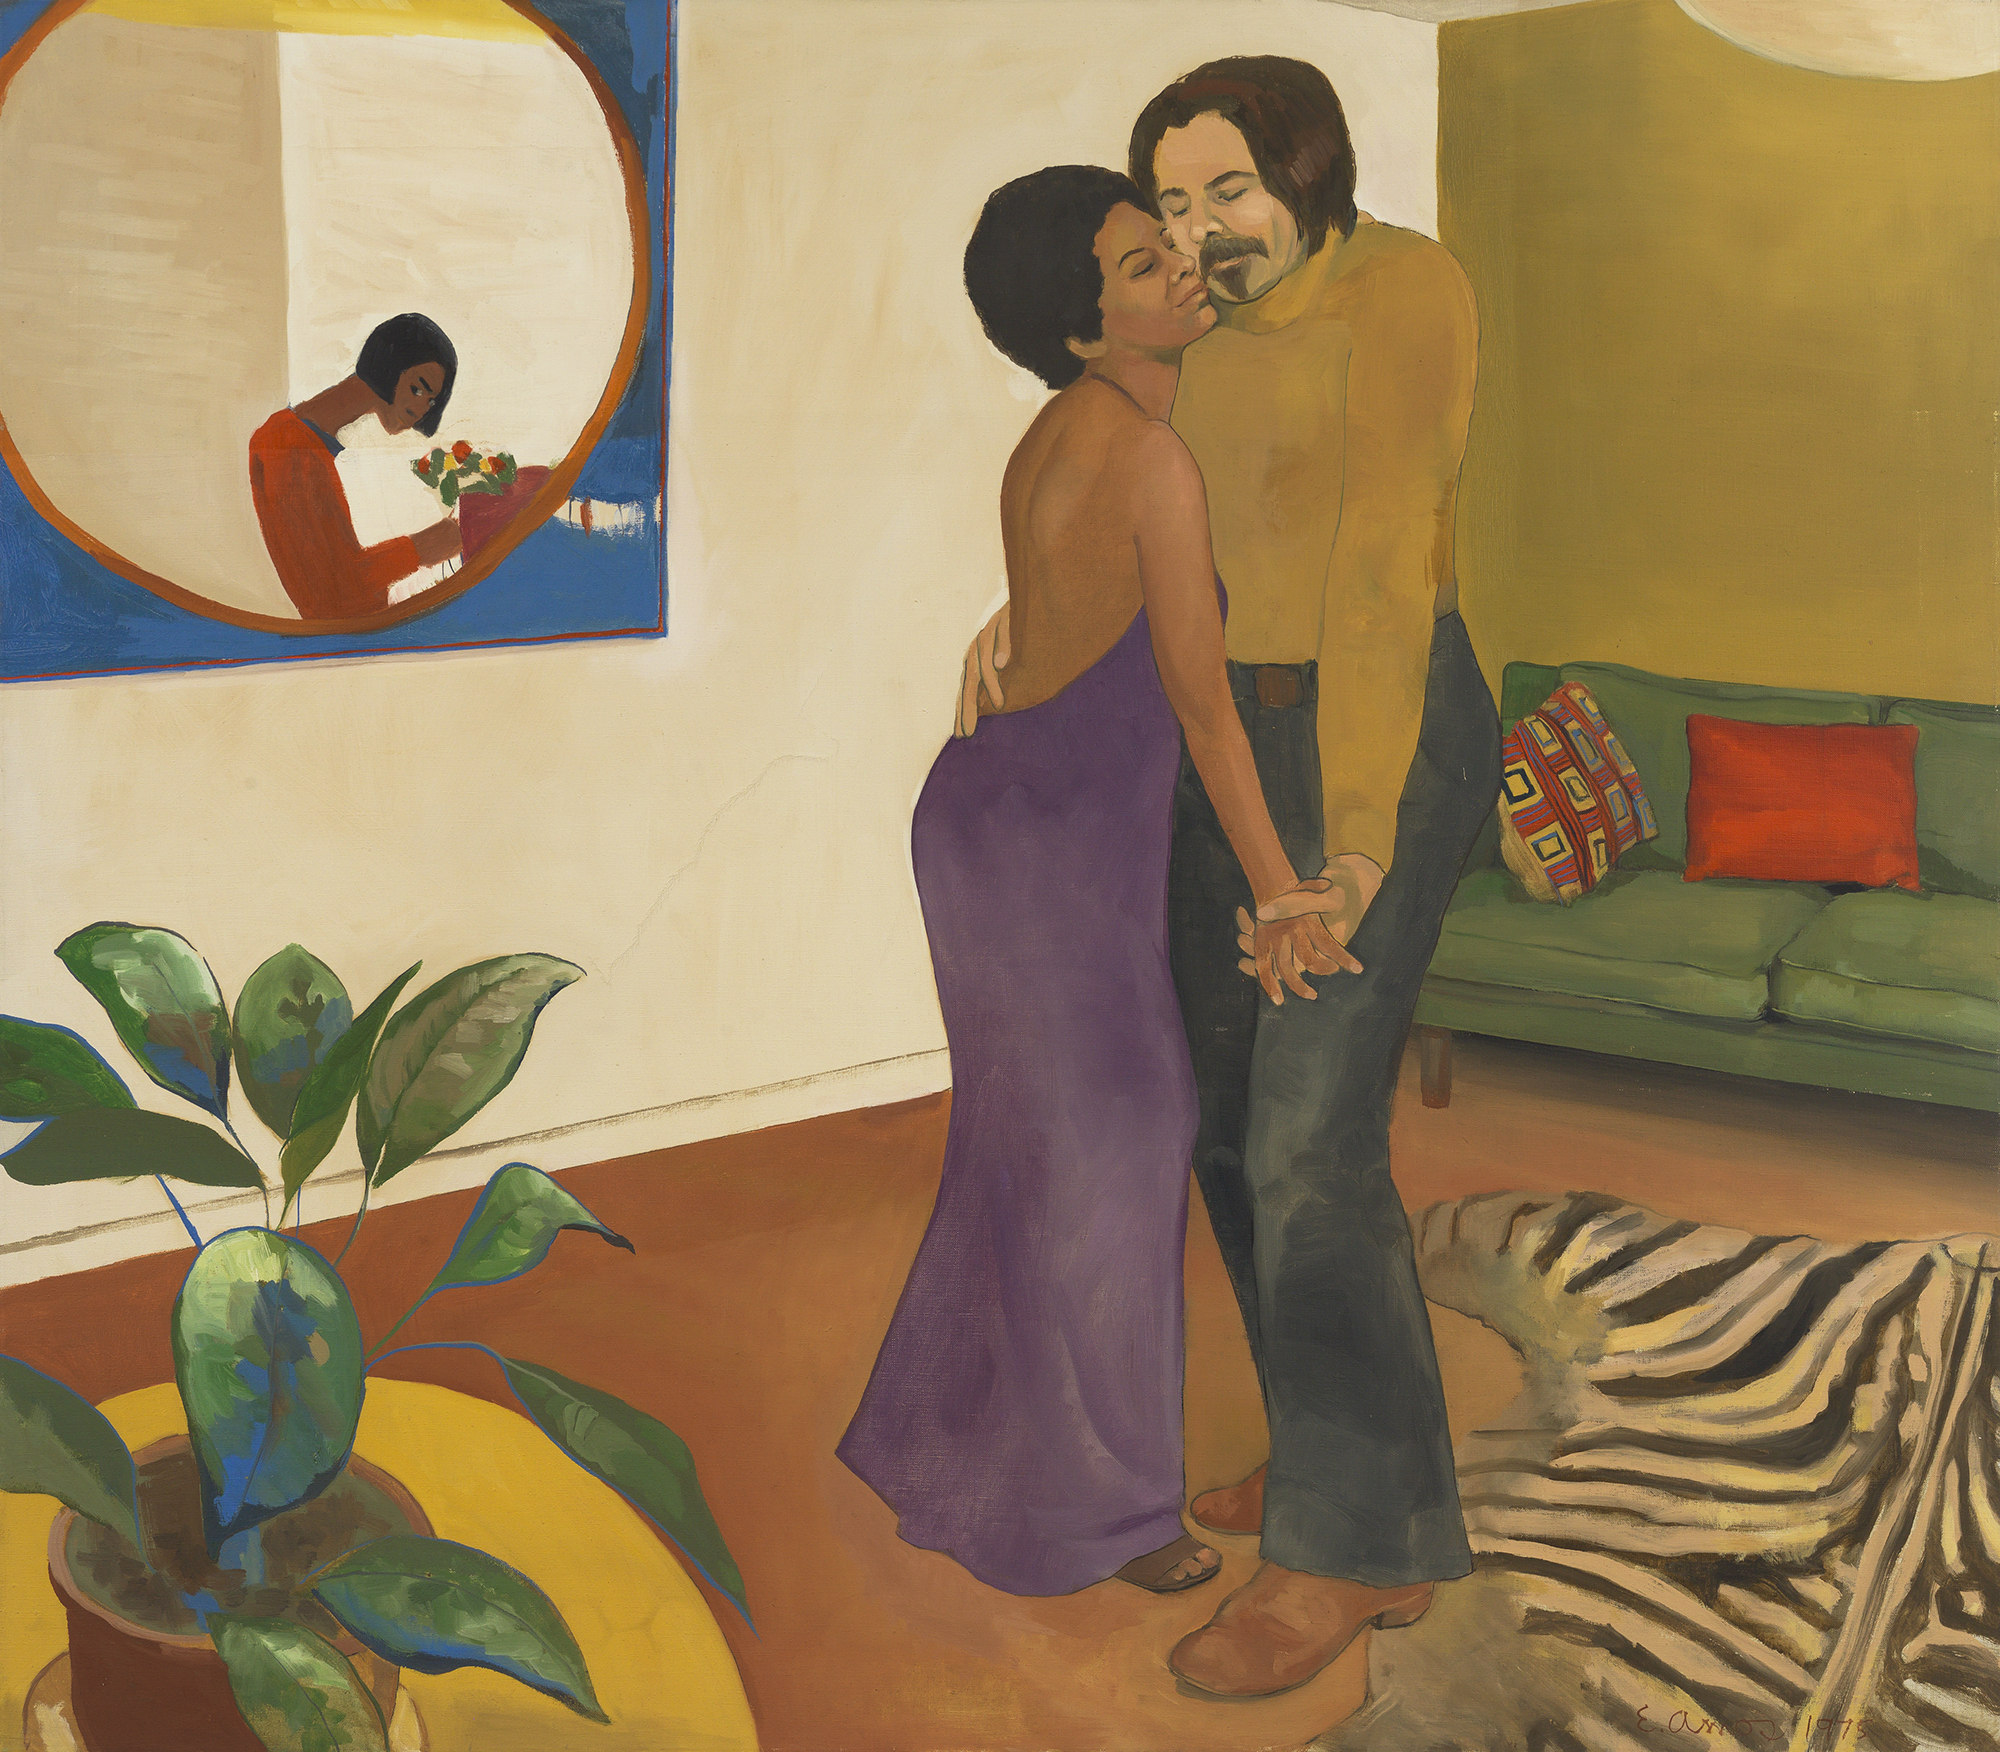 Emma Amos (America, born 1938). Sandy and Her Husband, 1973. Oil on canvas, 44º x 50º in. (112.4 x 127.6 cm). Courtesy of Emma Amos. © Emma Amos; courtesy of the artist and RYAN LEE, New York. Licensed by VAGA, New York. The final reproduced image is to be in no way altered from the original. This includes cropping or overlaying text.